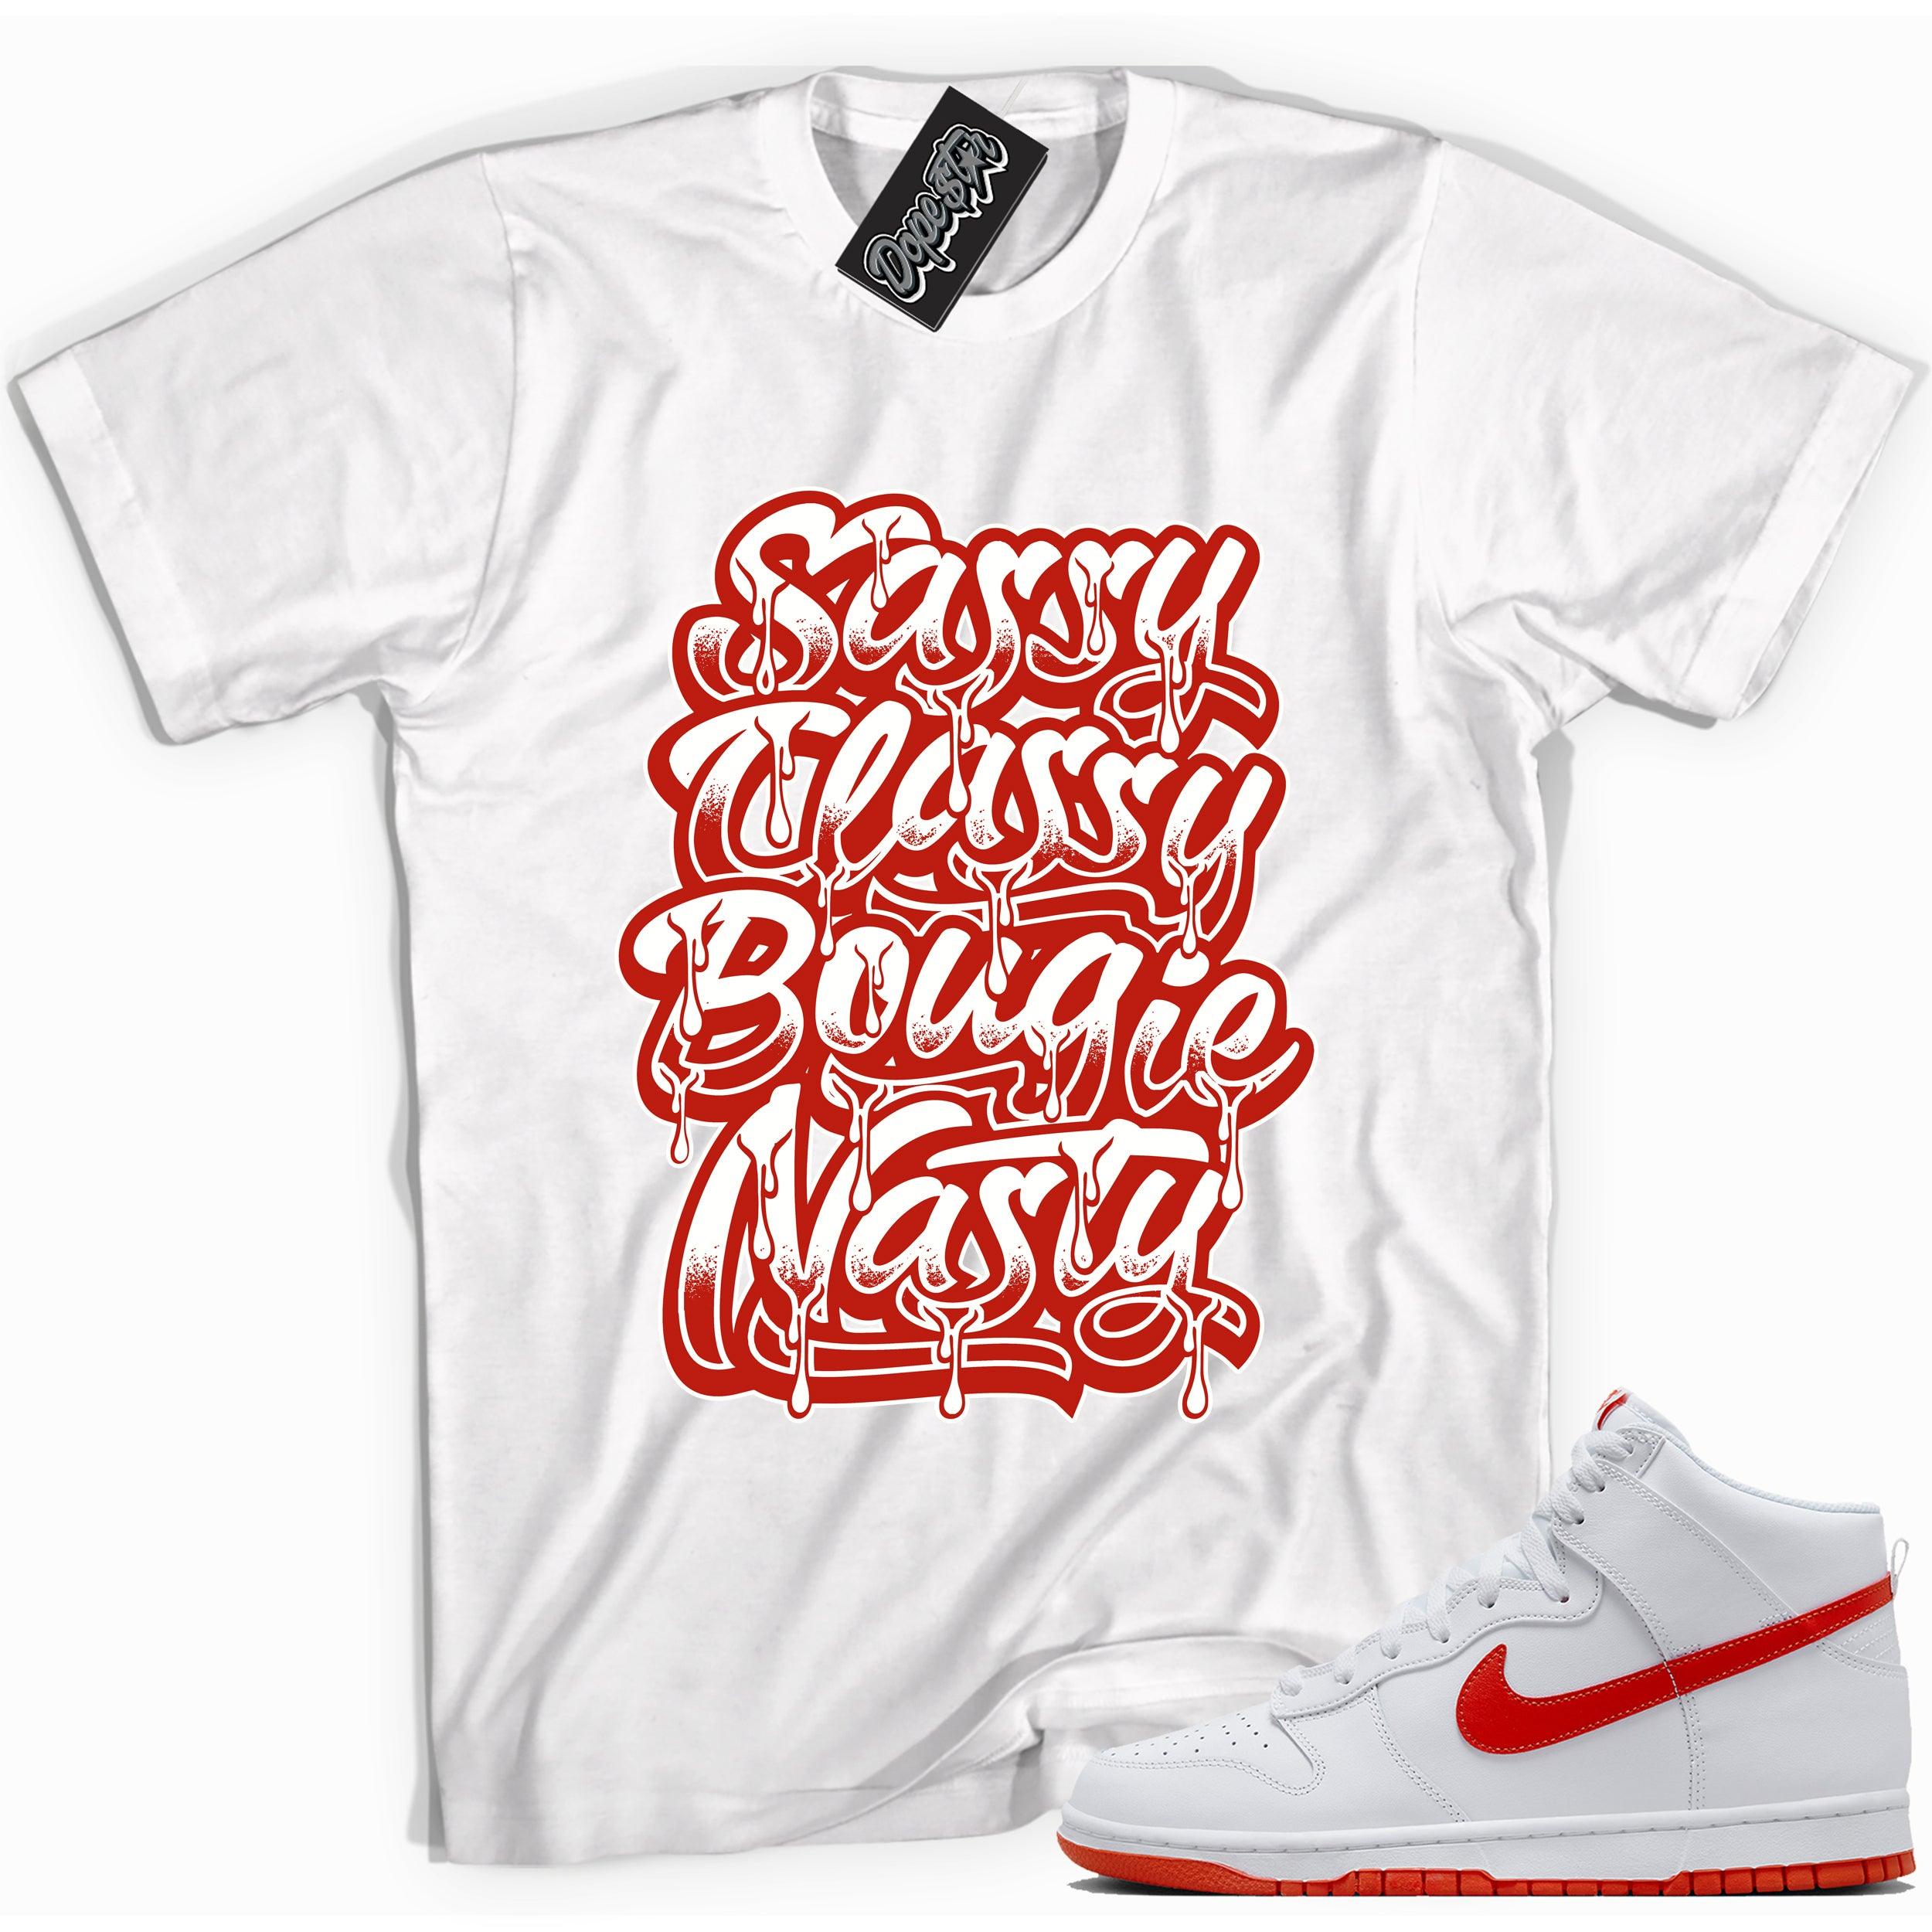 Cool white graphic tee with 'sassy classy bougie nasty' print, that perfectly matches Nike Dunk High White Picante Red sneakers.